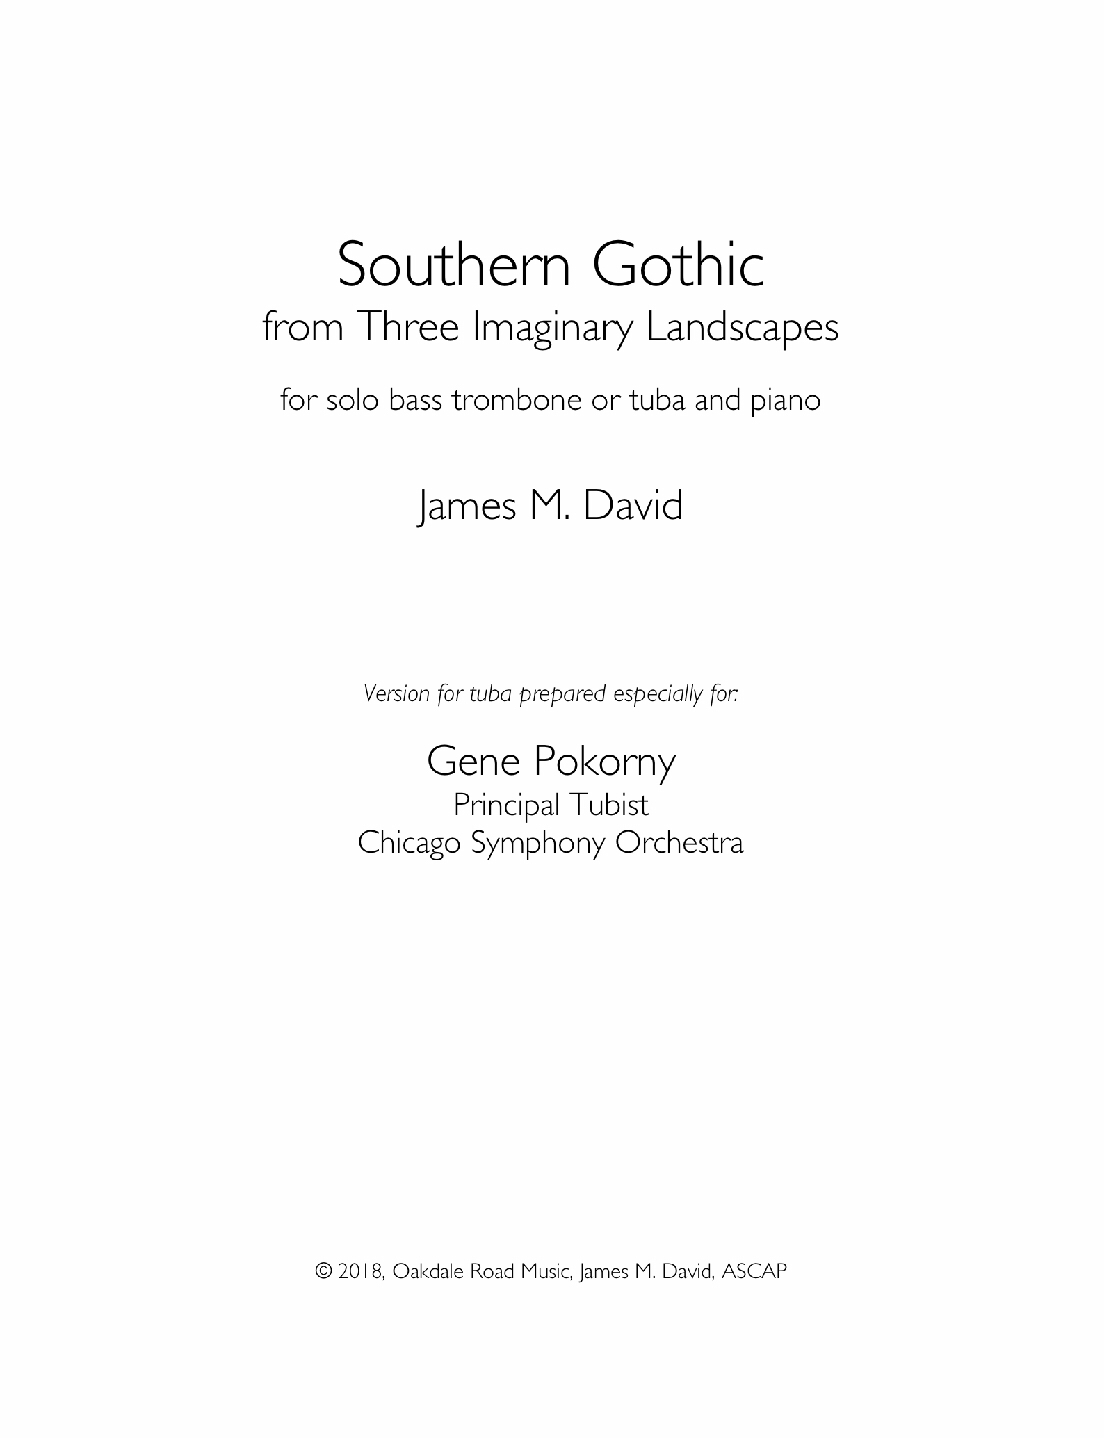 Southern Gothic by James David